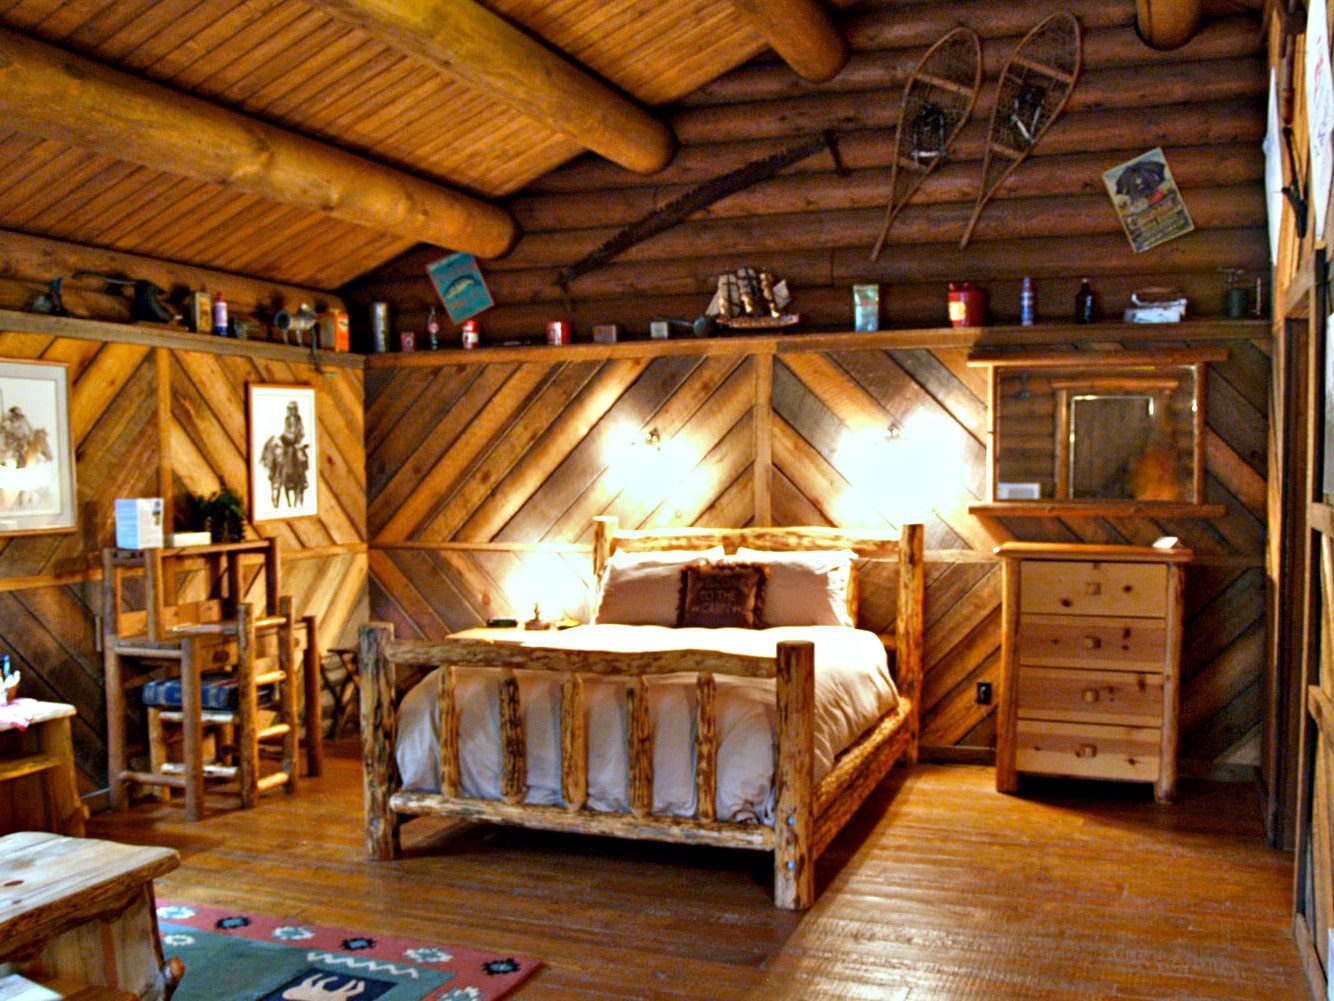 Cabins at Red Horse Mountain Ranch are rustic but cozy.